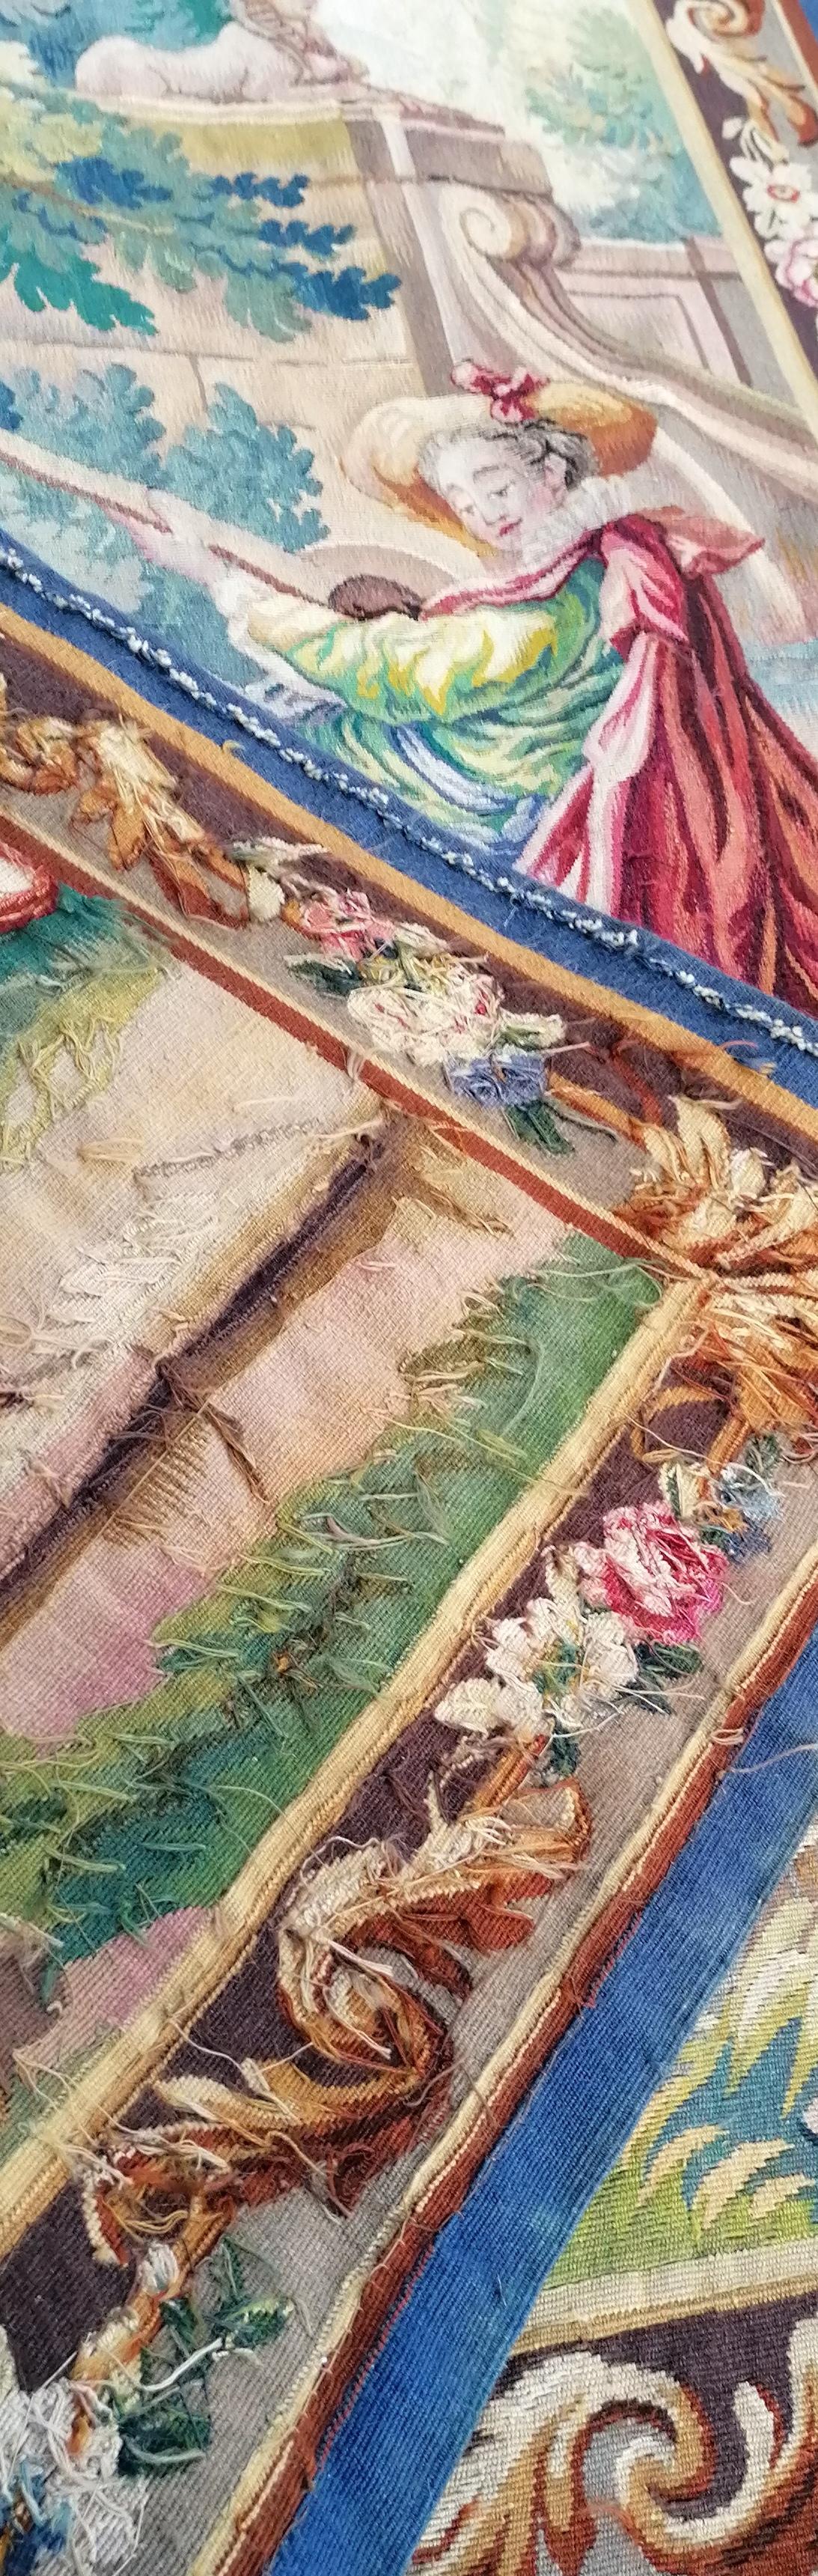 Hand-Woven  19th Century Aubusson Tapestry - N° 1060 For Sale